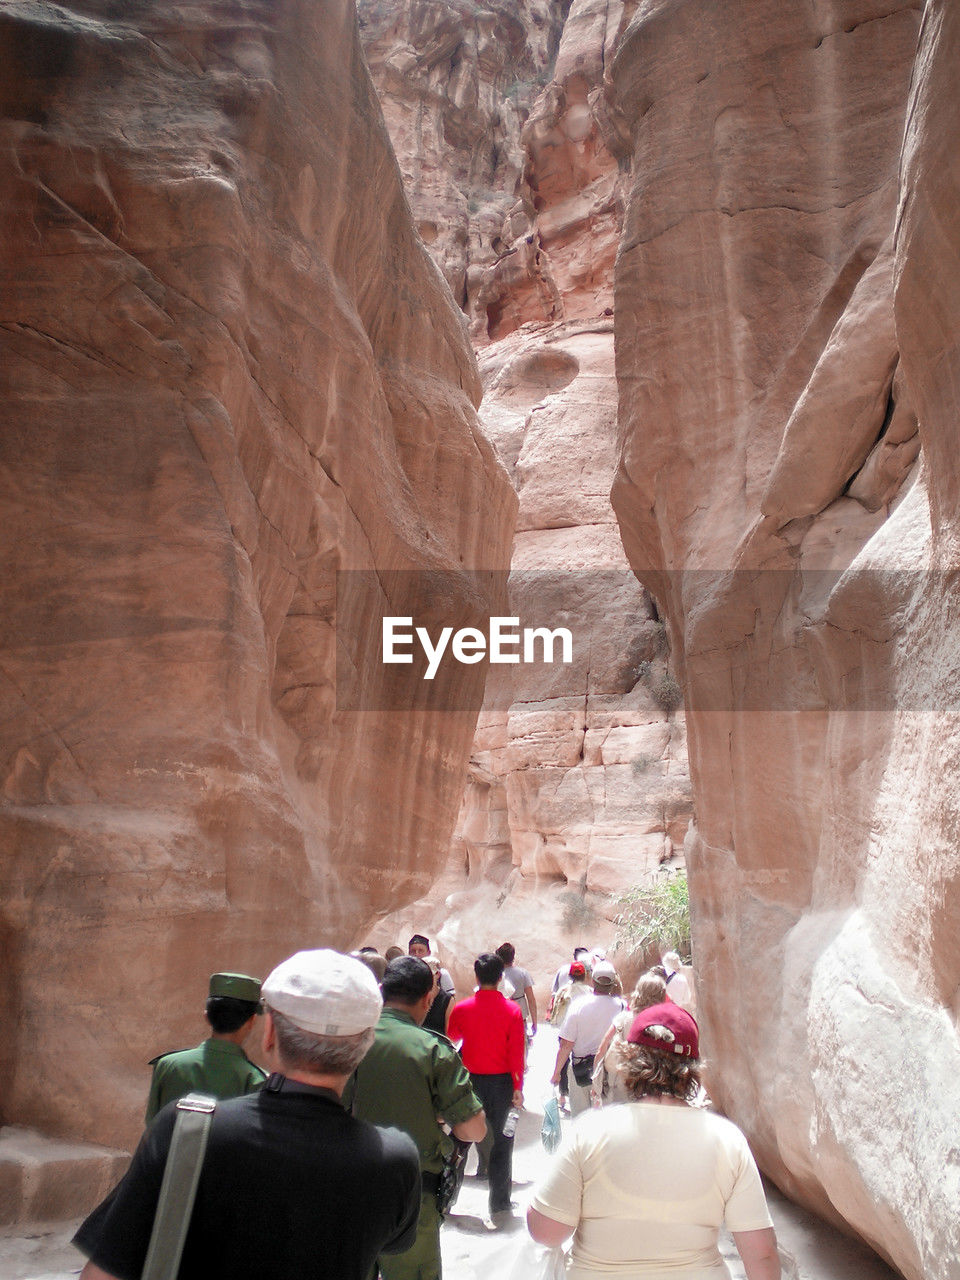 rock, rock formation, group of people, travel destinations, travel, adult, men, nature, geology, tourism, women, canyon, physical geography, leisure activity, wadi, architecture, rear view, tourist, arch, history, day, lifestyles, activity, beauty in nature, the past, mountain, outdoors, adventure, non-urban scene, exploration, ancient, medium group of people, clothing, religion, scenics - nature, holiday, vacation, trip, cliff, crowd, formation, group